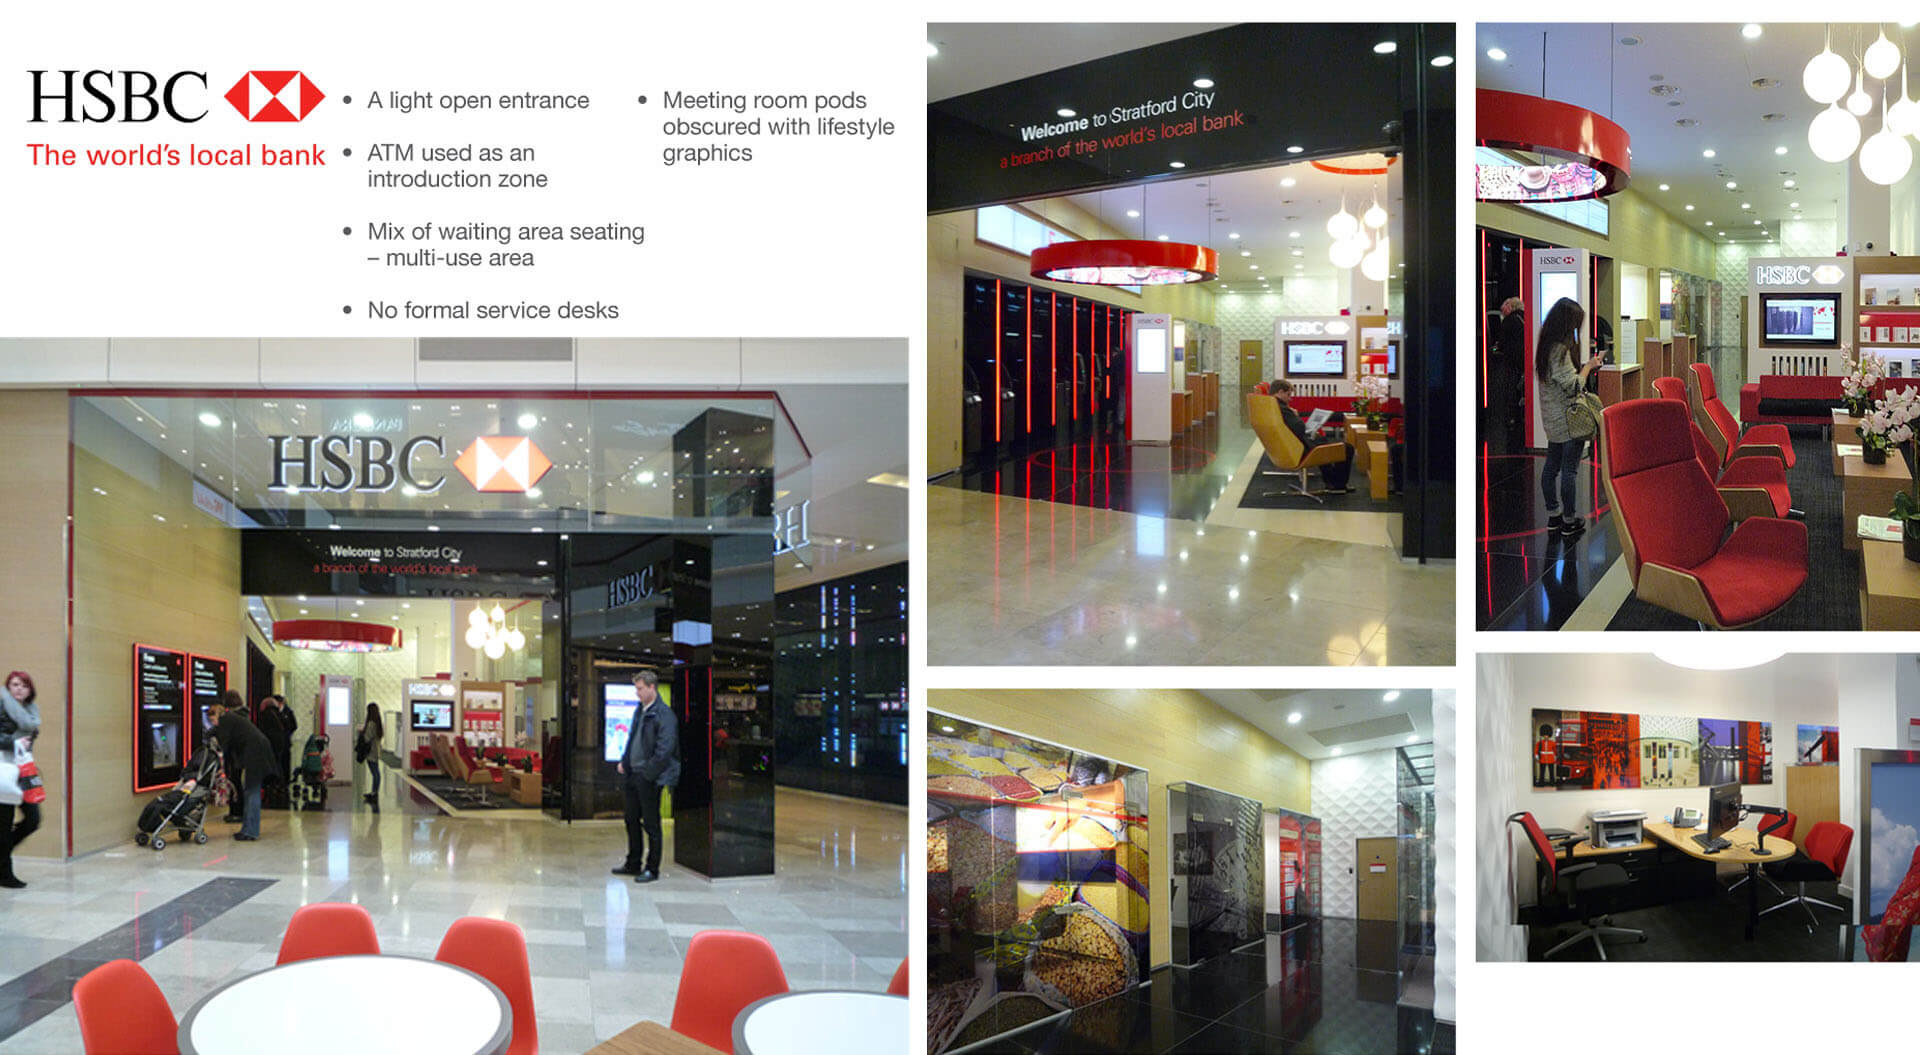 HSBC branch audit, design concepts with ideas for optimizing the bank